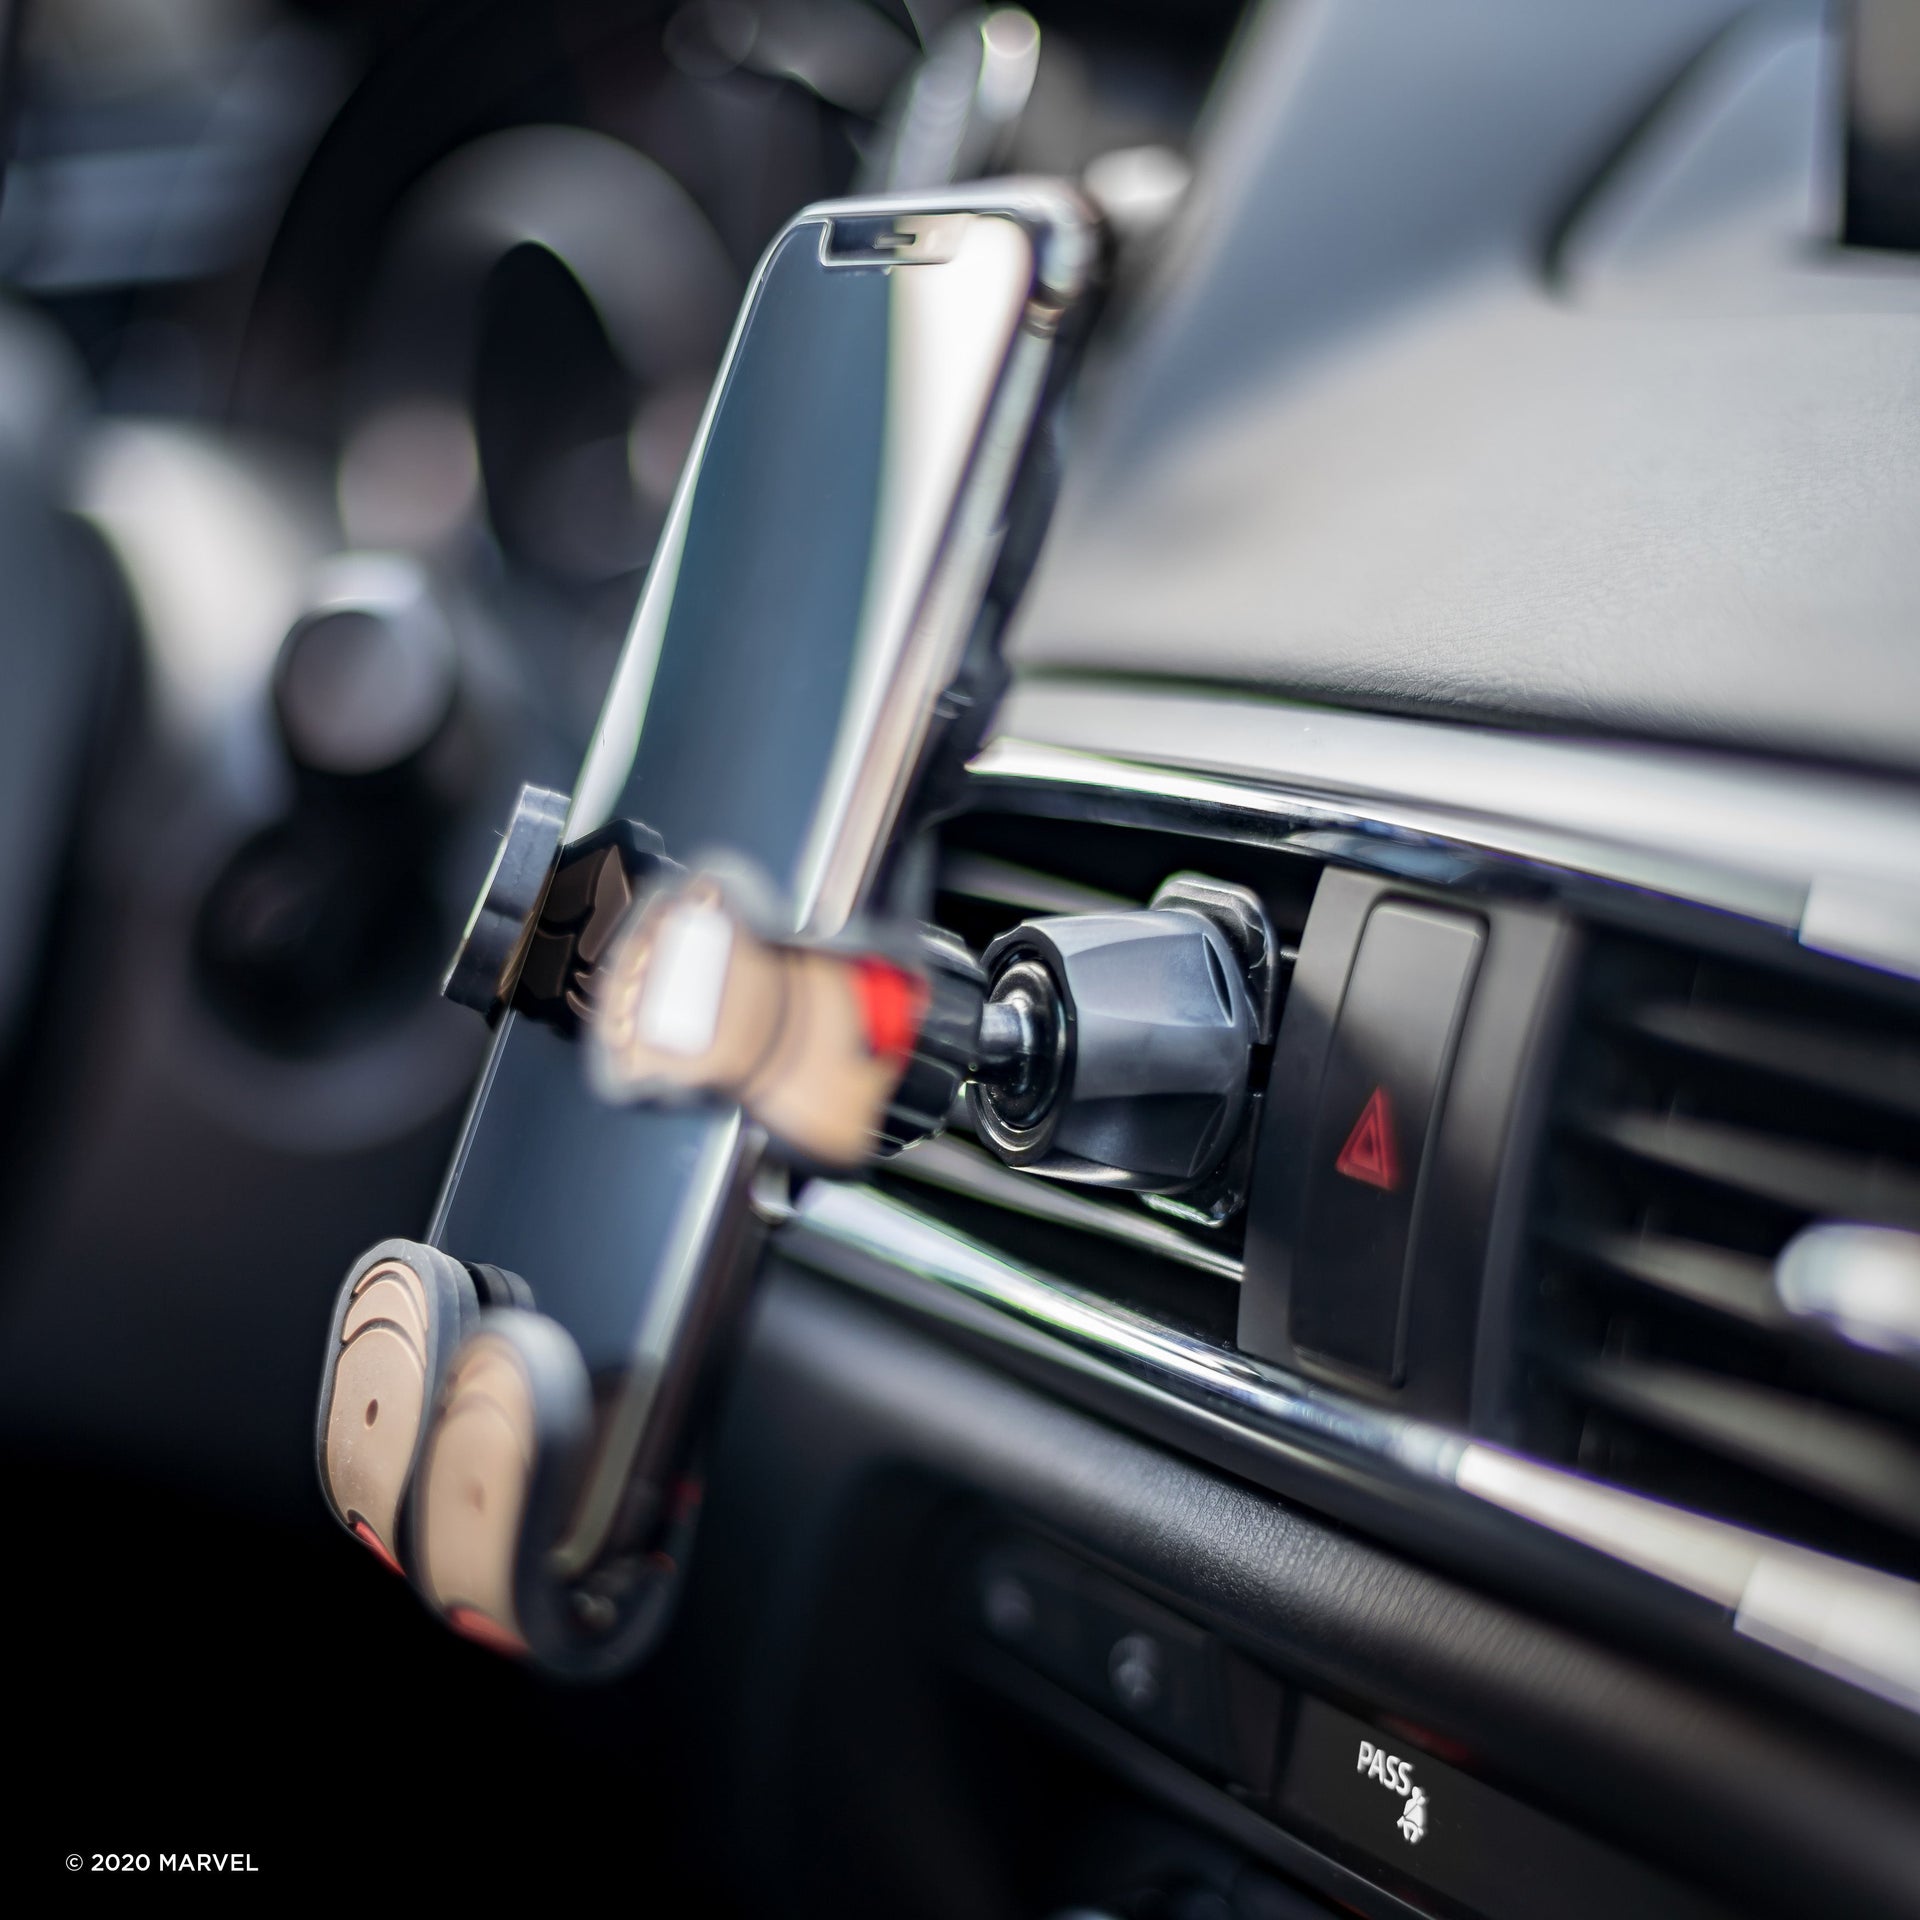 Image of Marvel Captain America Hug Buddy holding a phone, attached to a car air vent, close-up on the vent clip